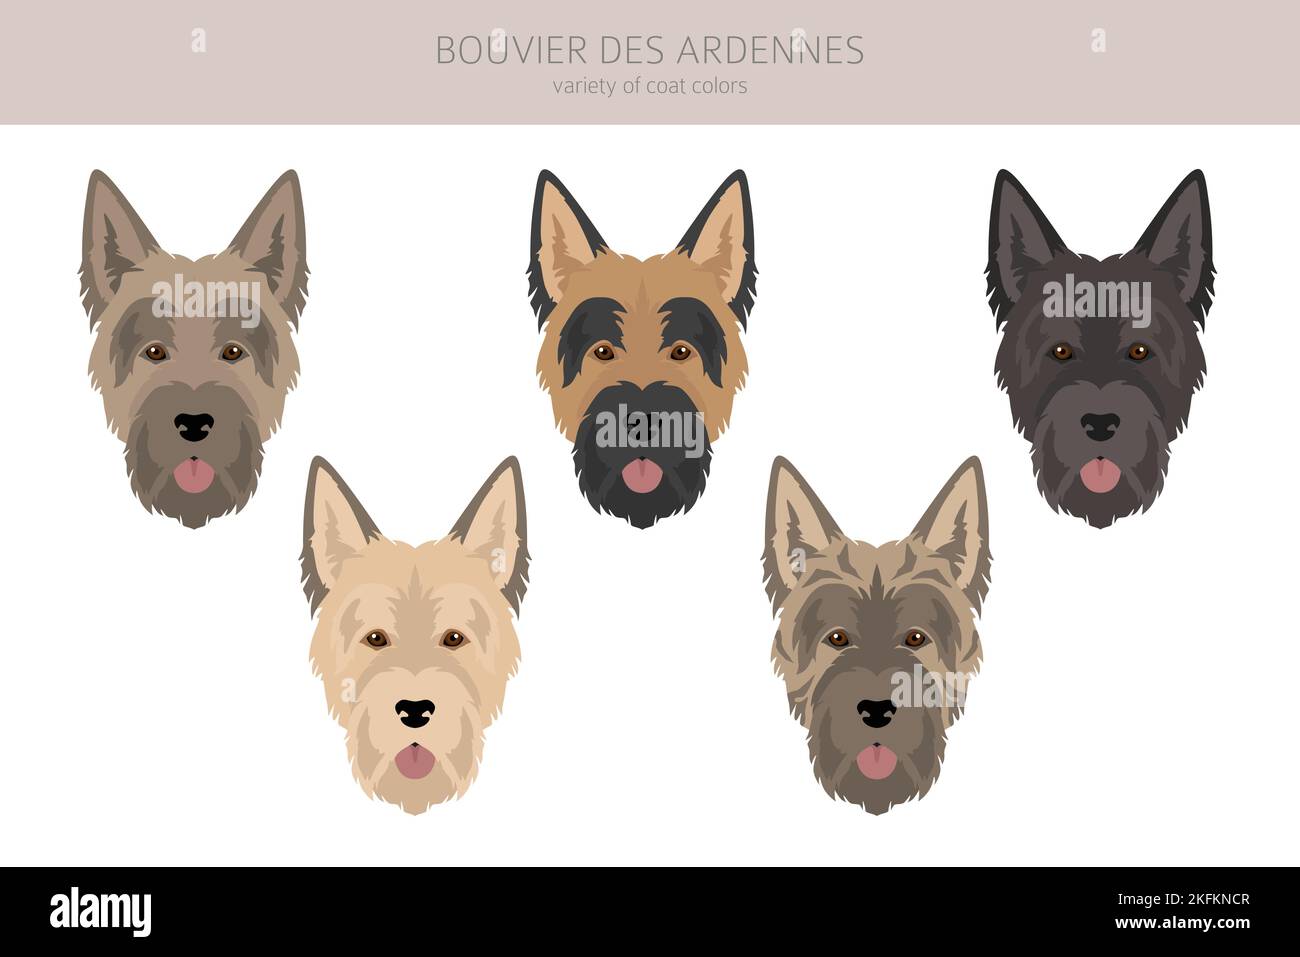 Bouvier des Ardennes clipart. Different coat colors and poses set.  Vector illustration Stock Vector